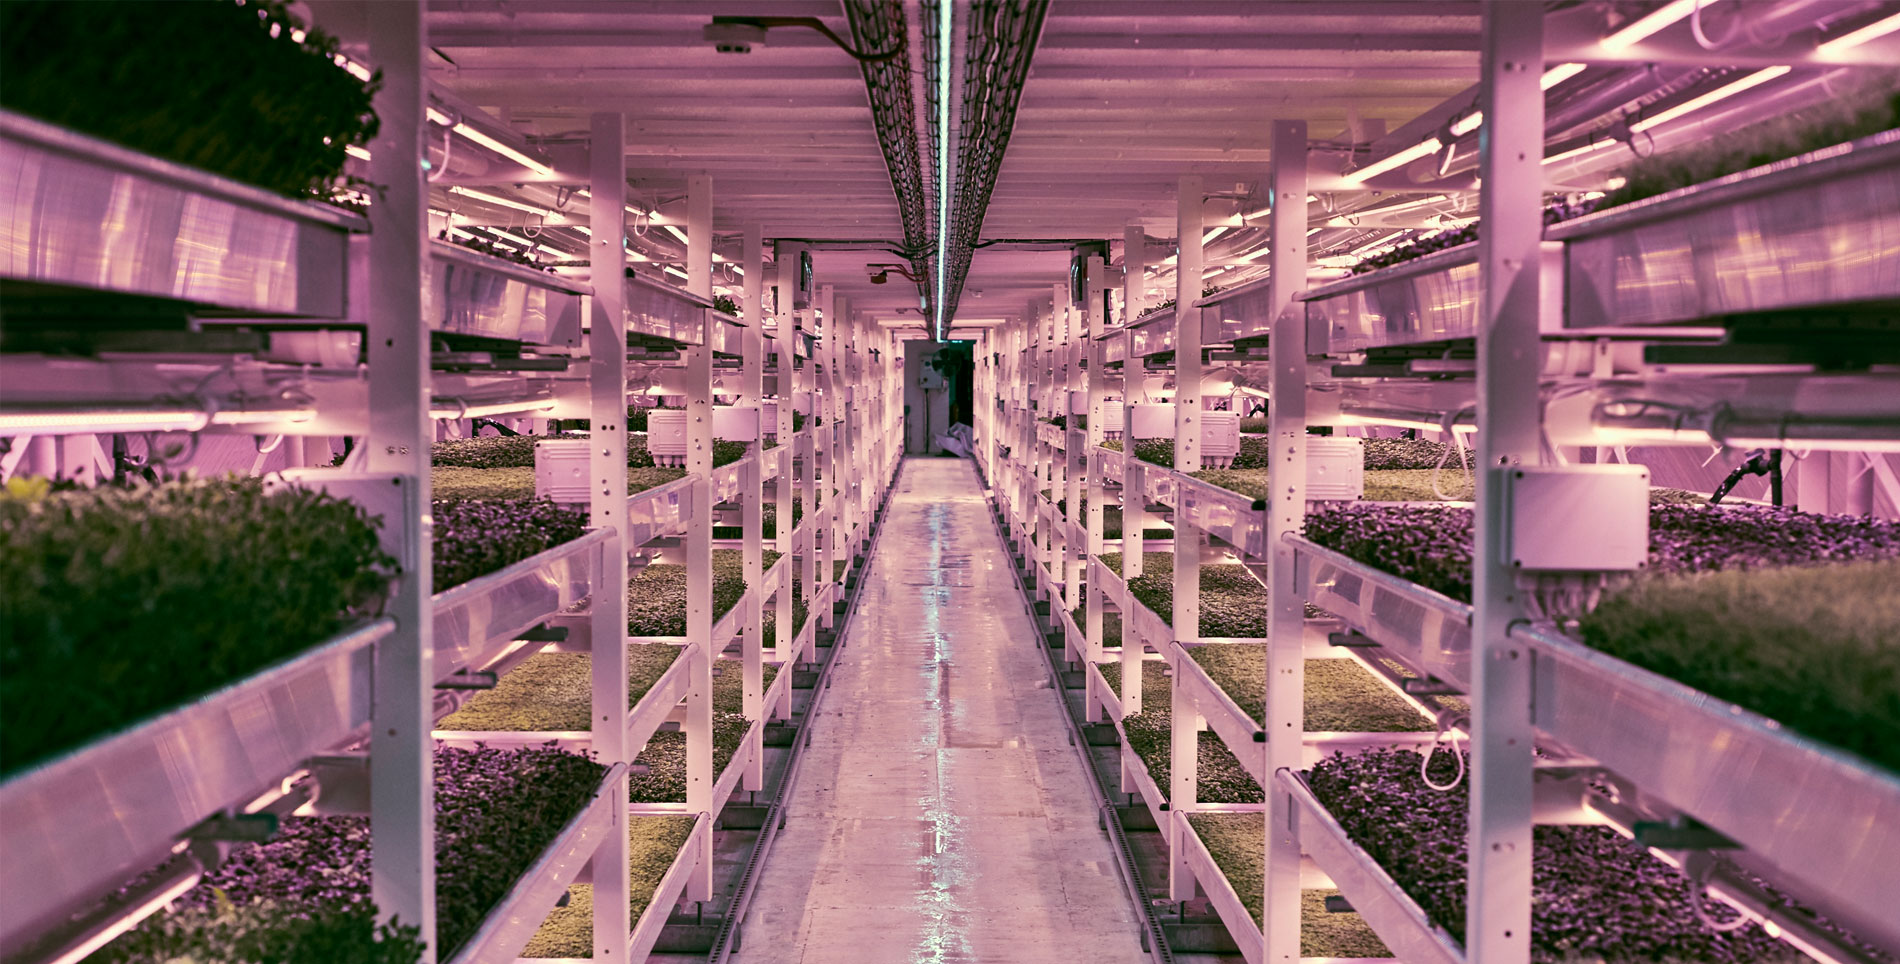 In London, Growing Underground Looks for Long-term Farming Solutions ...